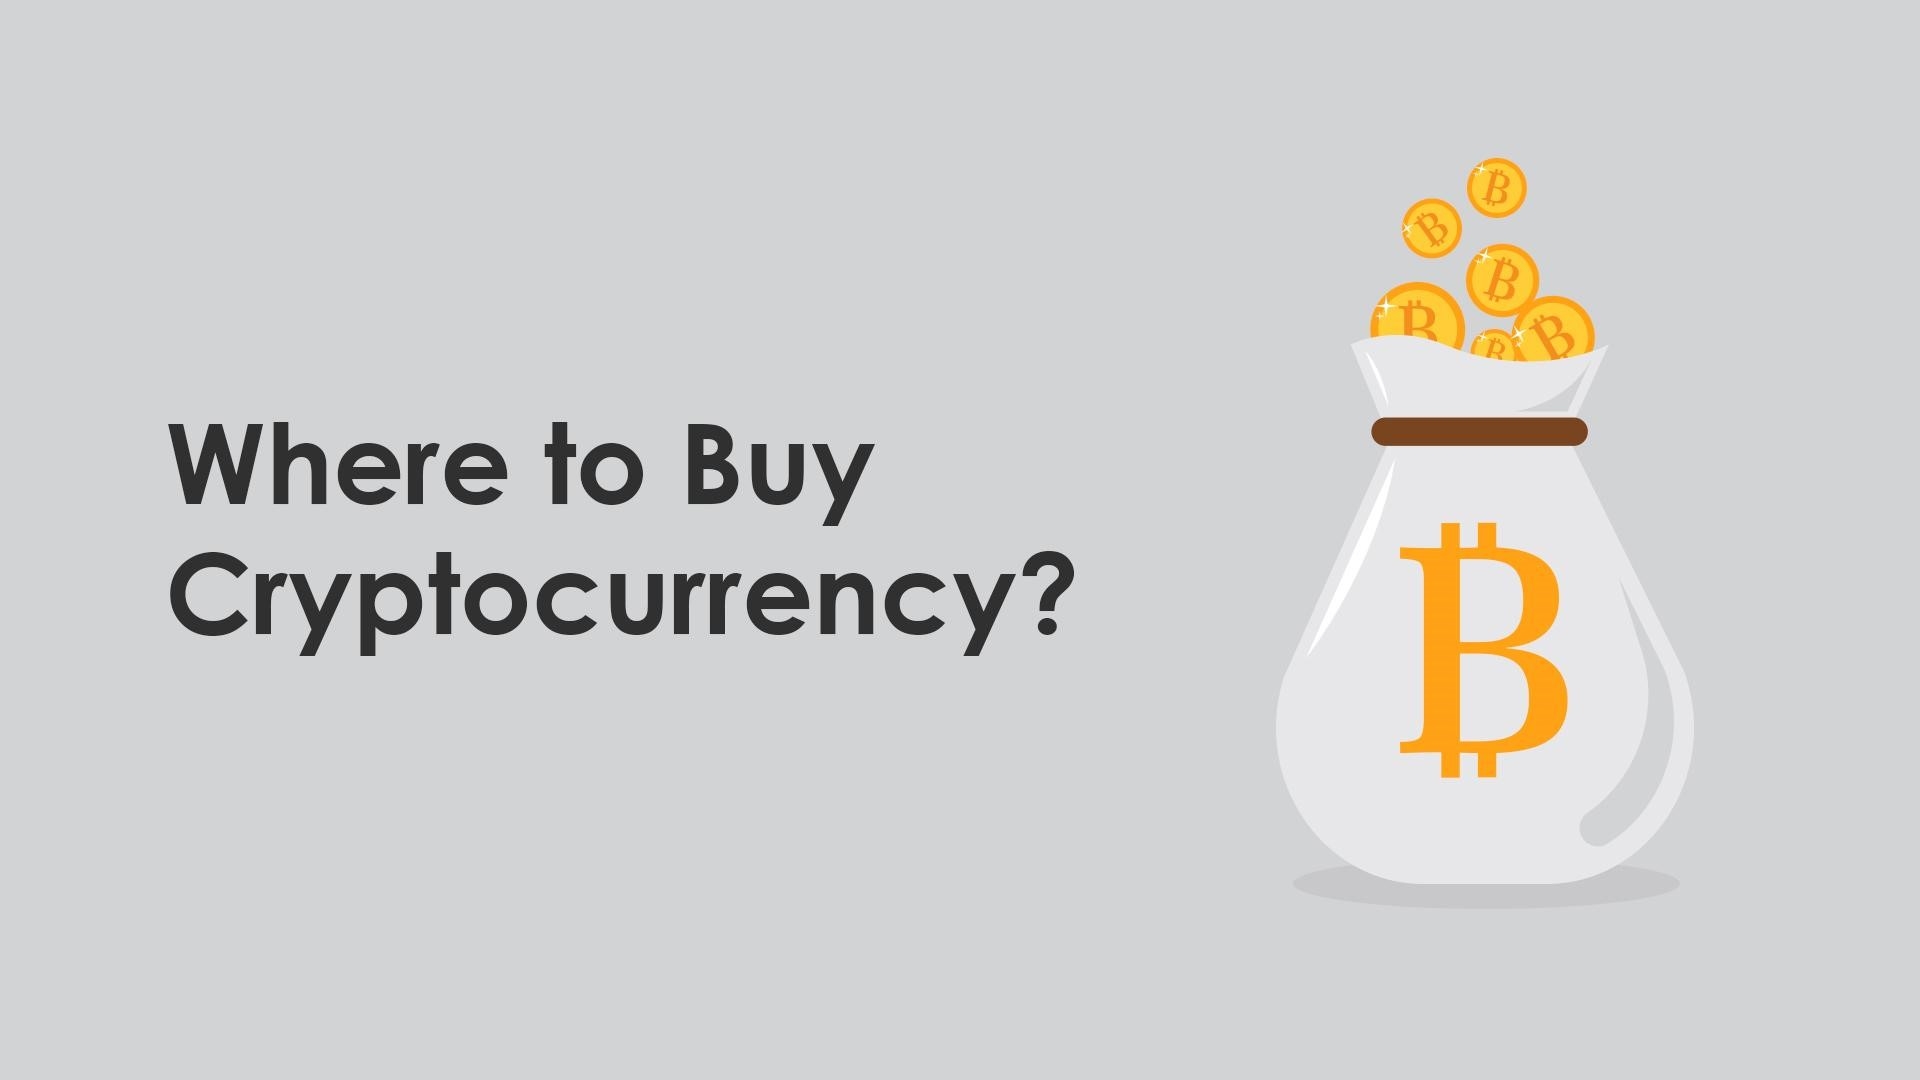 Where to Buy Cryptocurrency: Switchere.com is the Answer